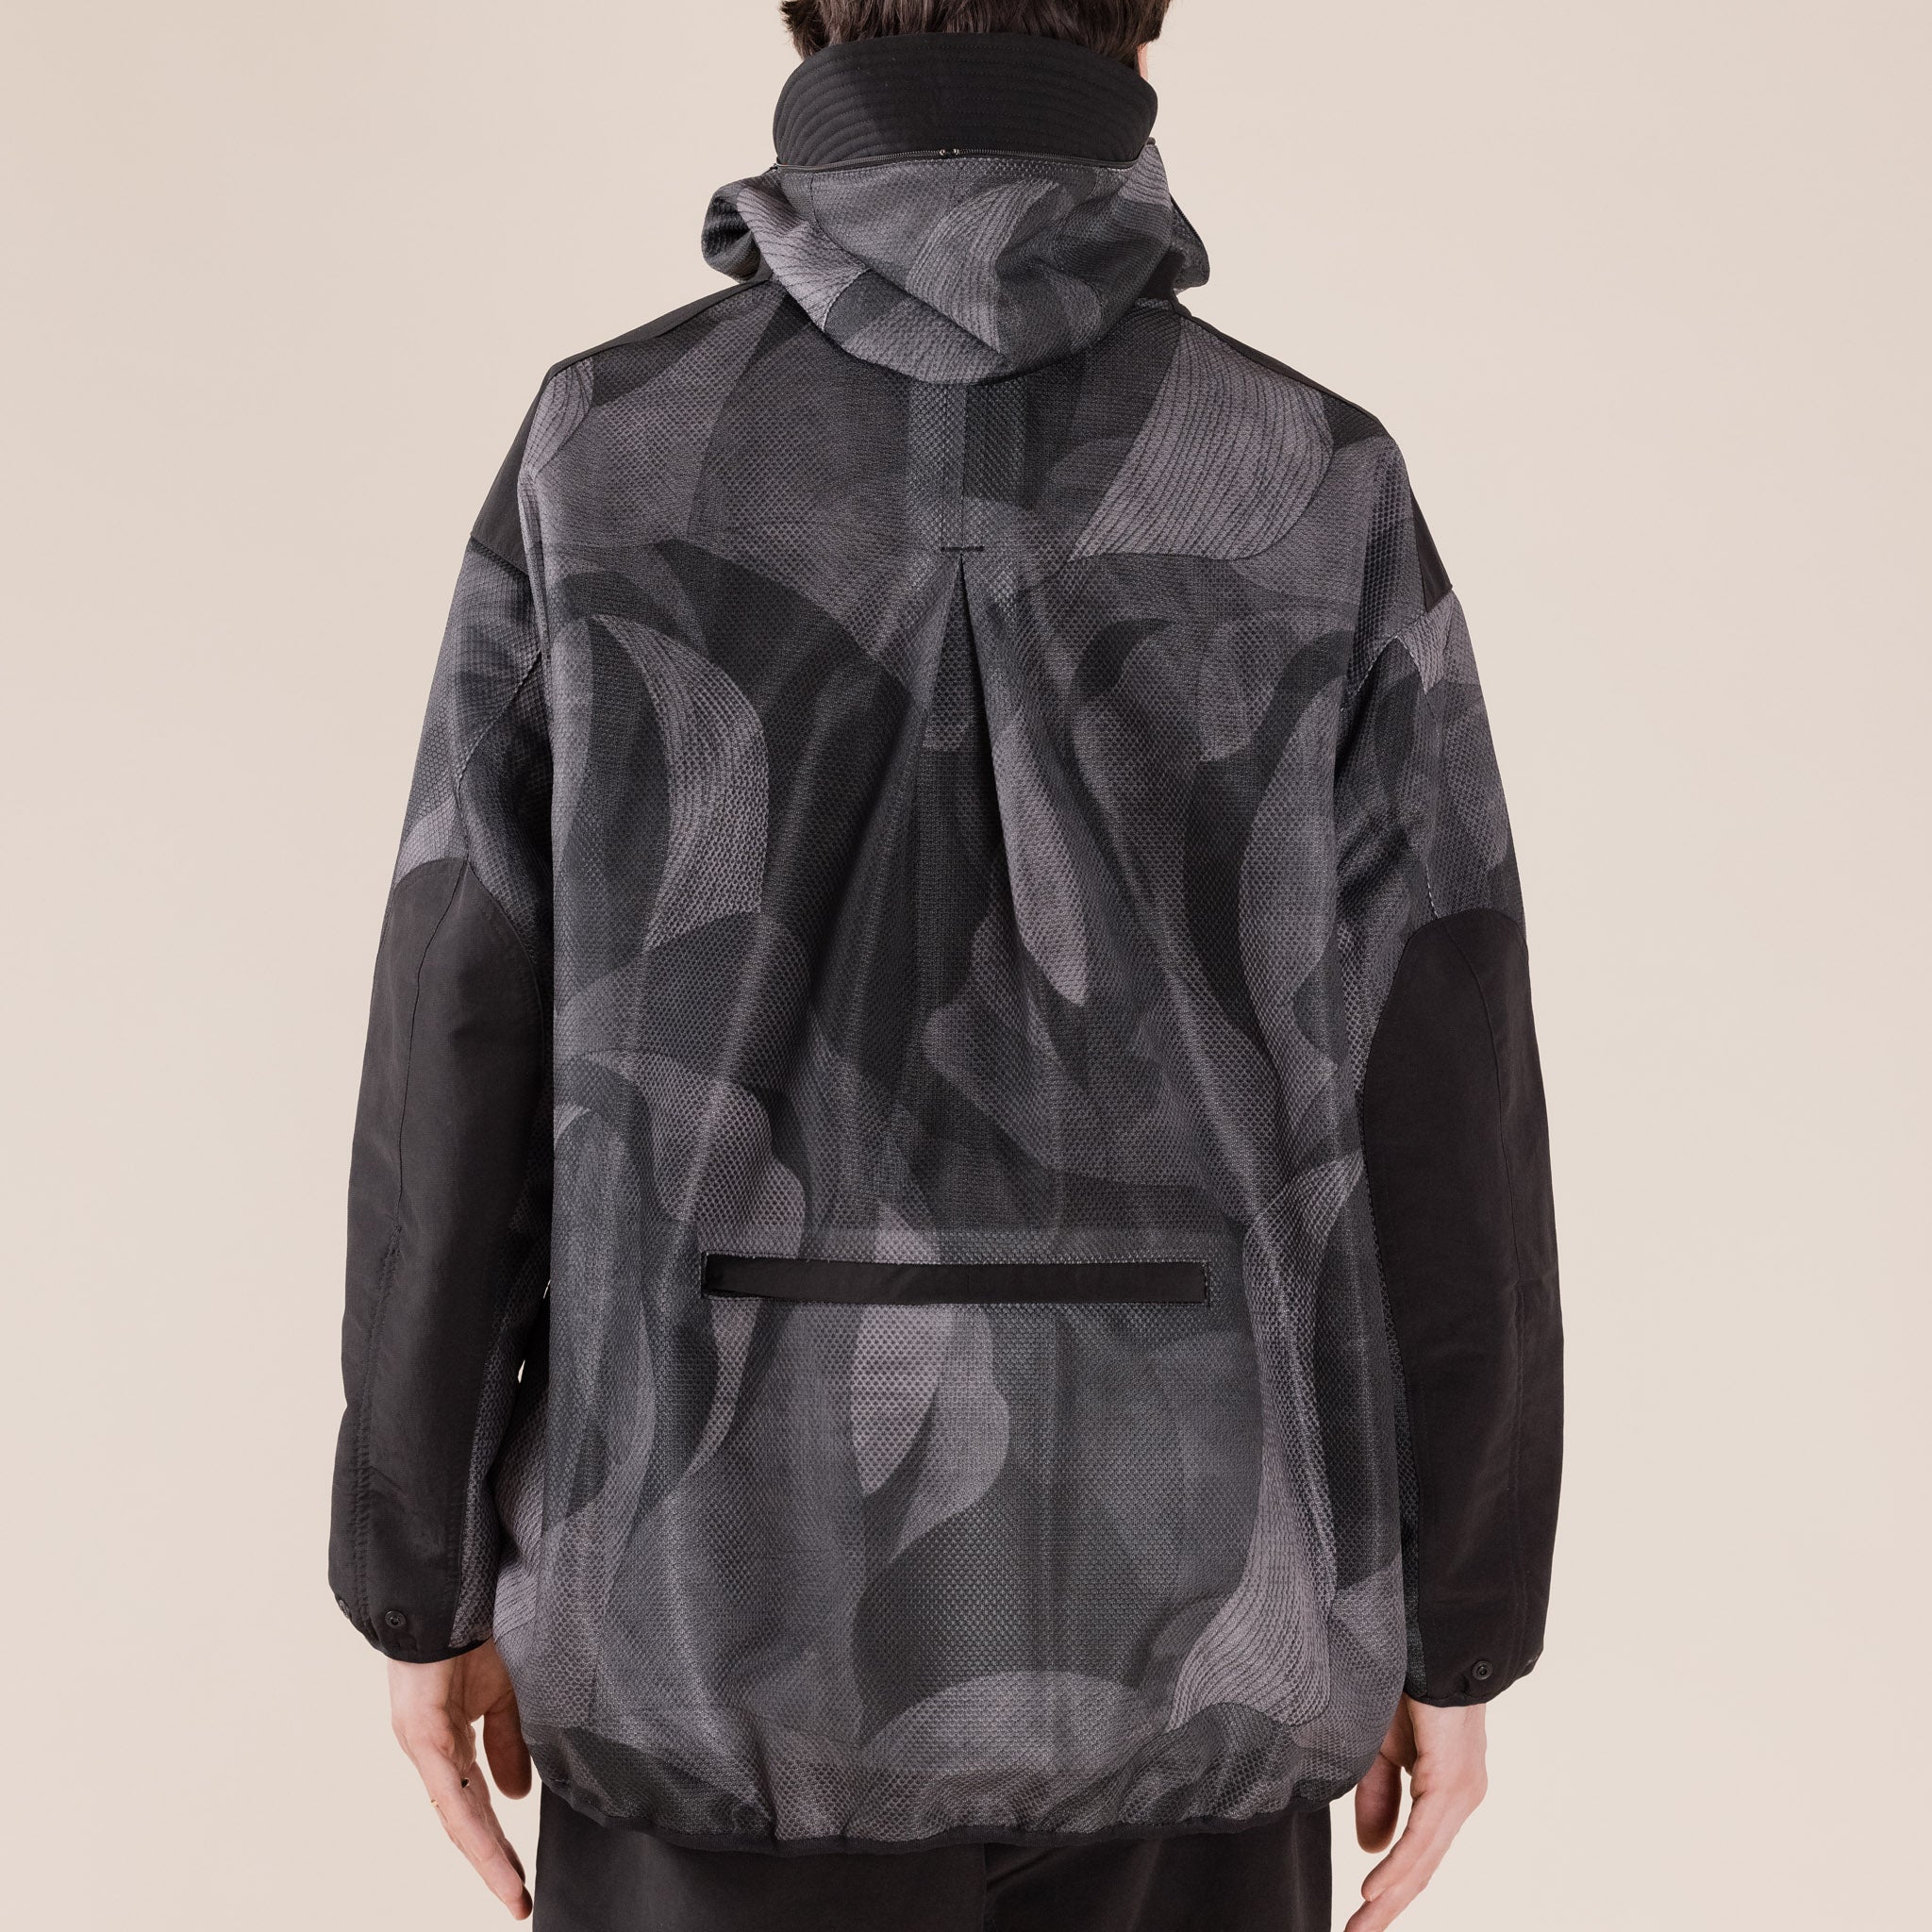 This Thing Of Ours x Norbit by Hiroshi Nozawa - Insect Shield Jacket - A/C Black Grey Exclusive Collaboration